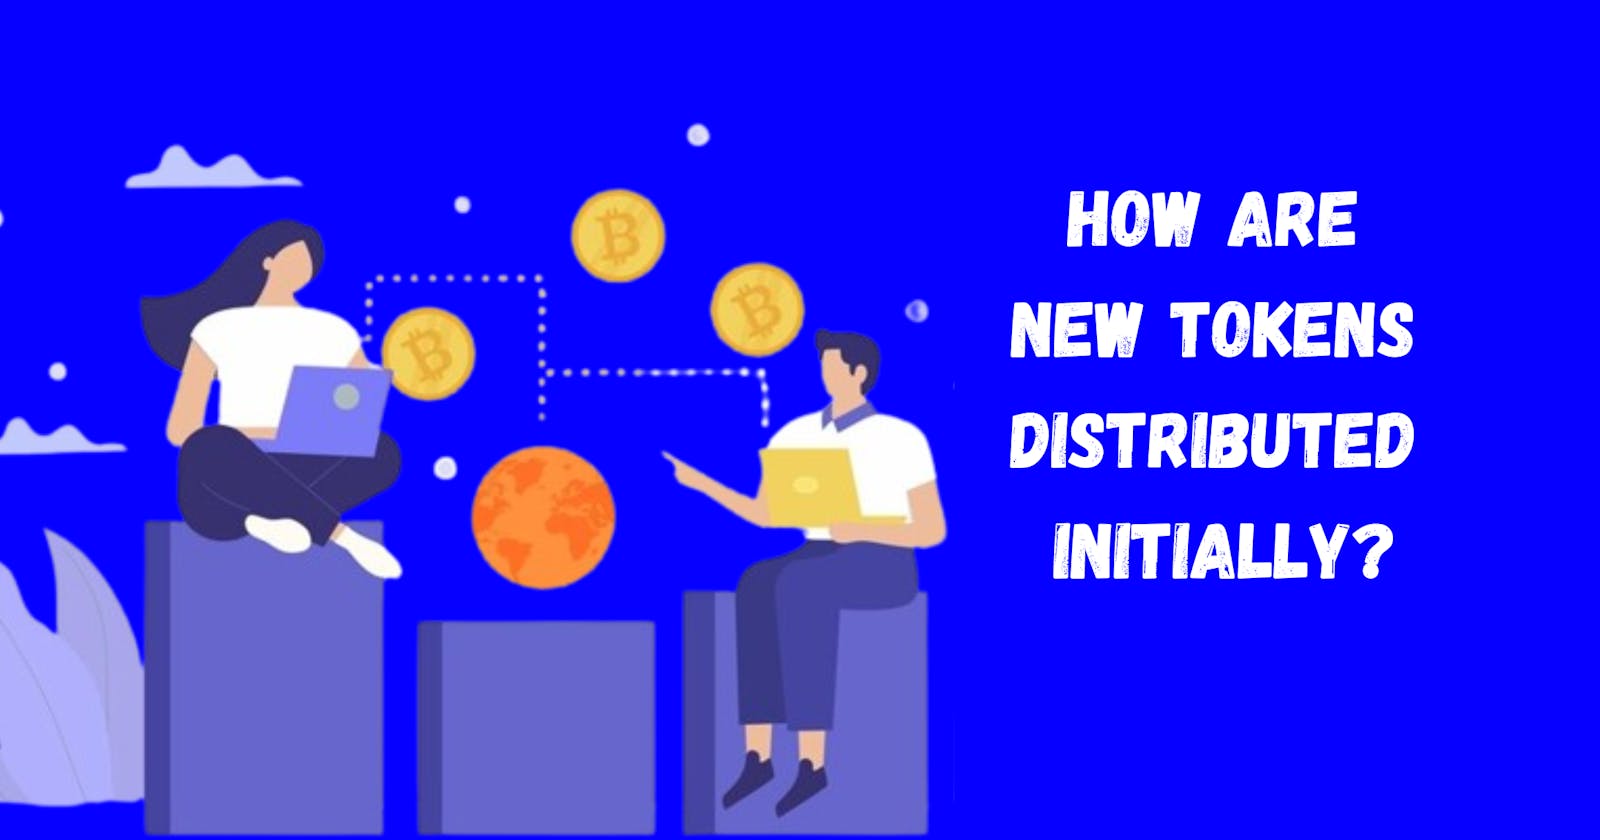 How are new tokens distributed initially?